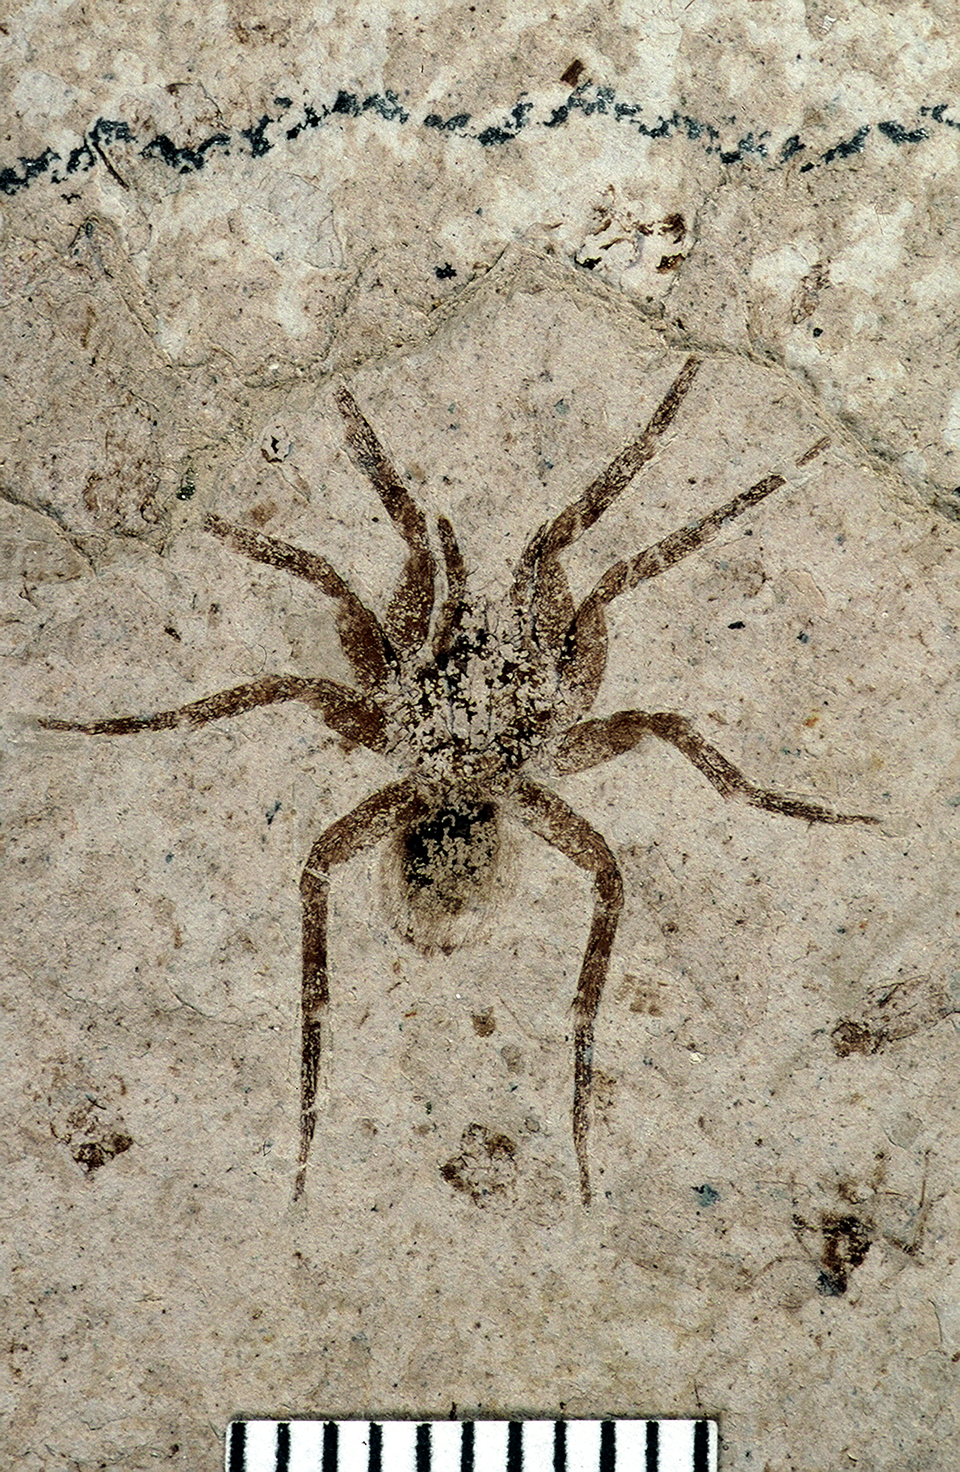 A dark spider fossil on a piece of tan shale.